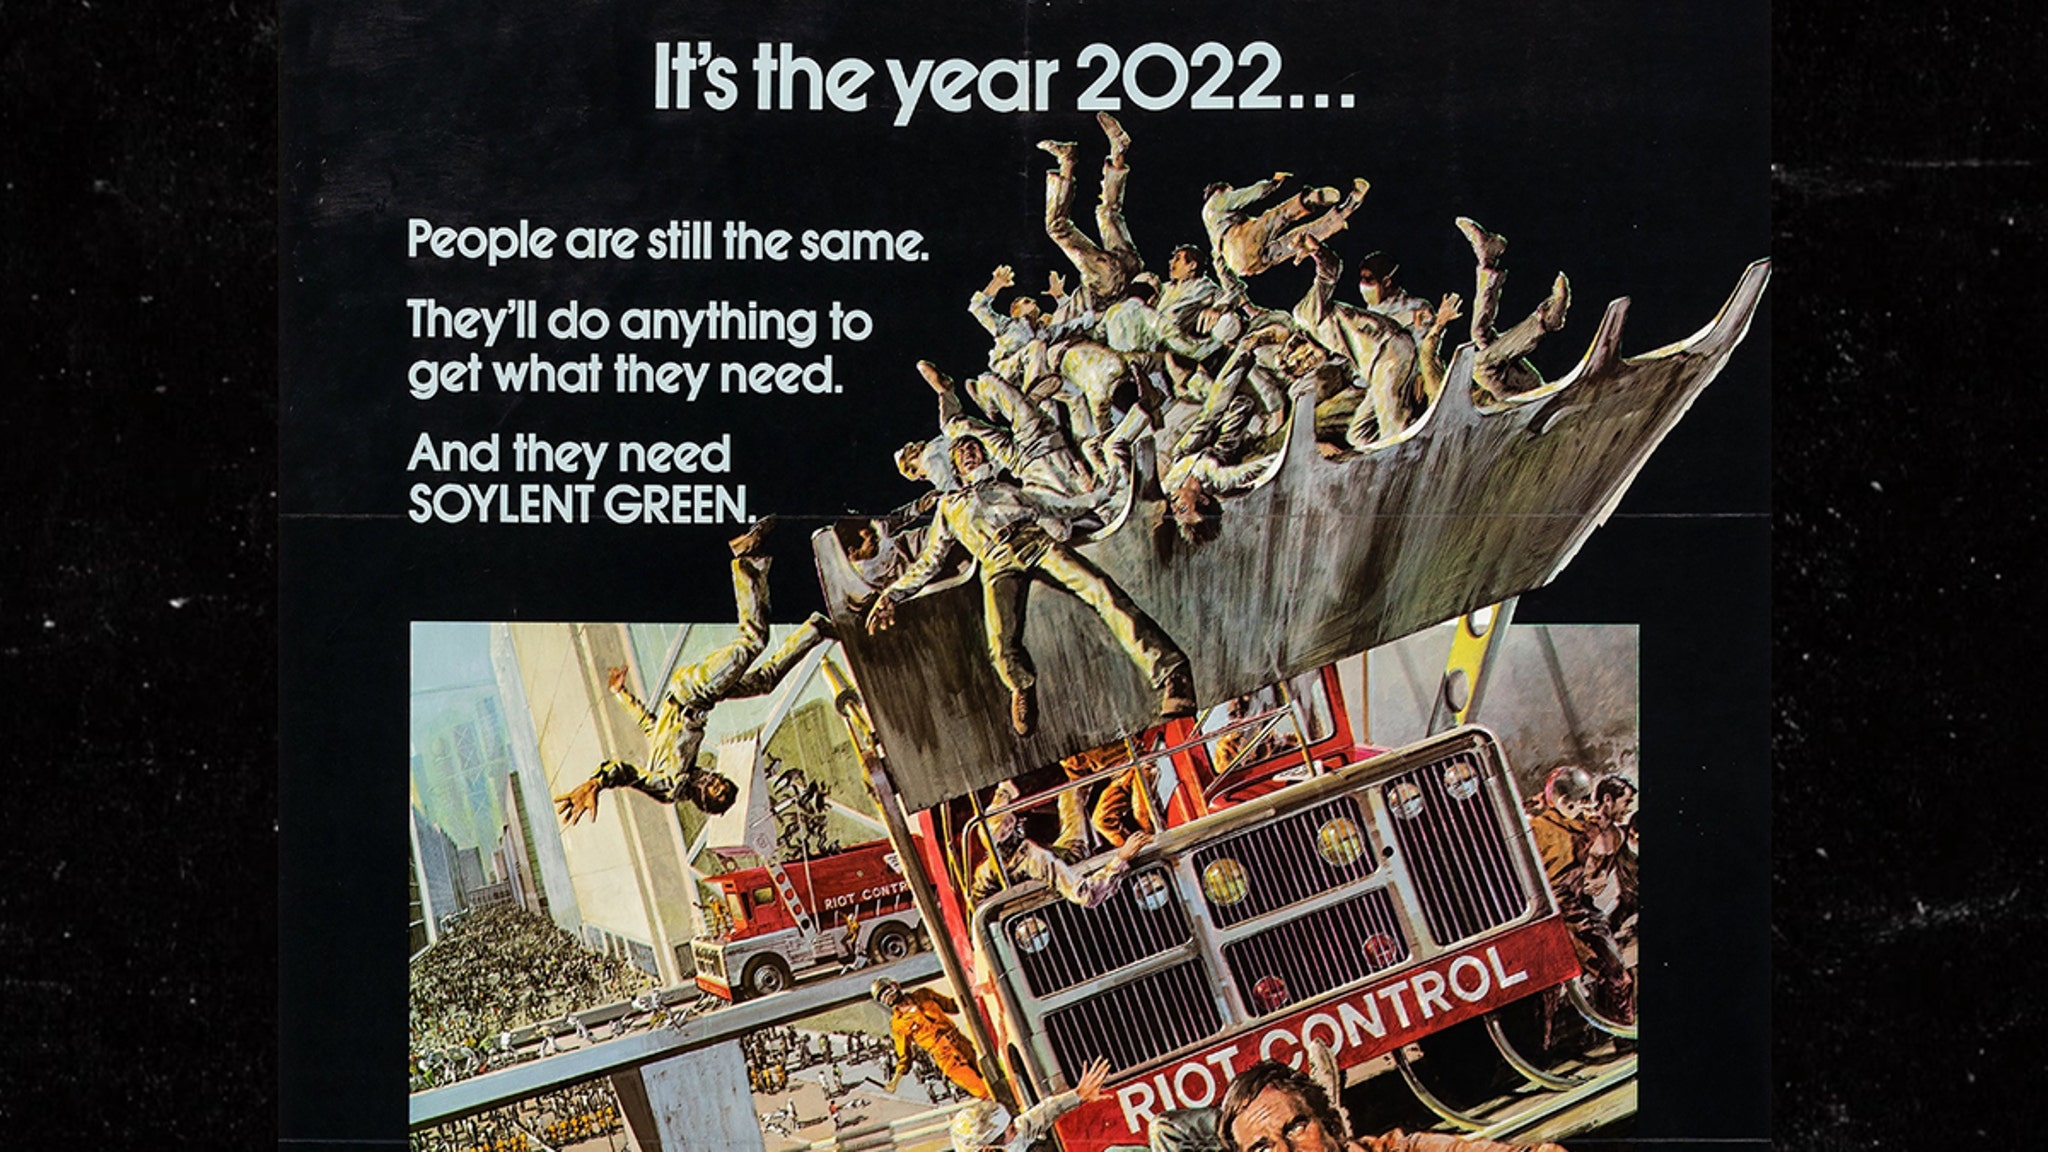 ‘Soylent Green’ trends after NYT asks why cannibalism is so fashionable